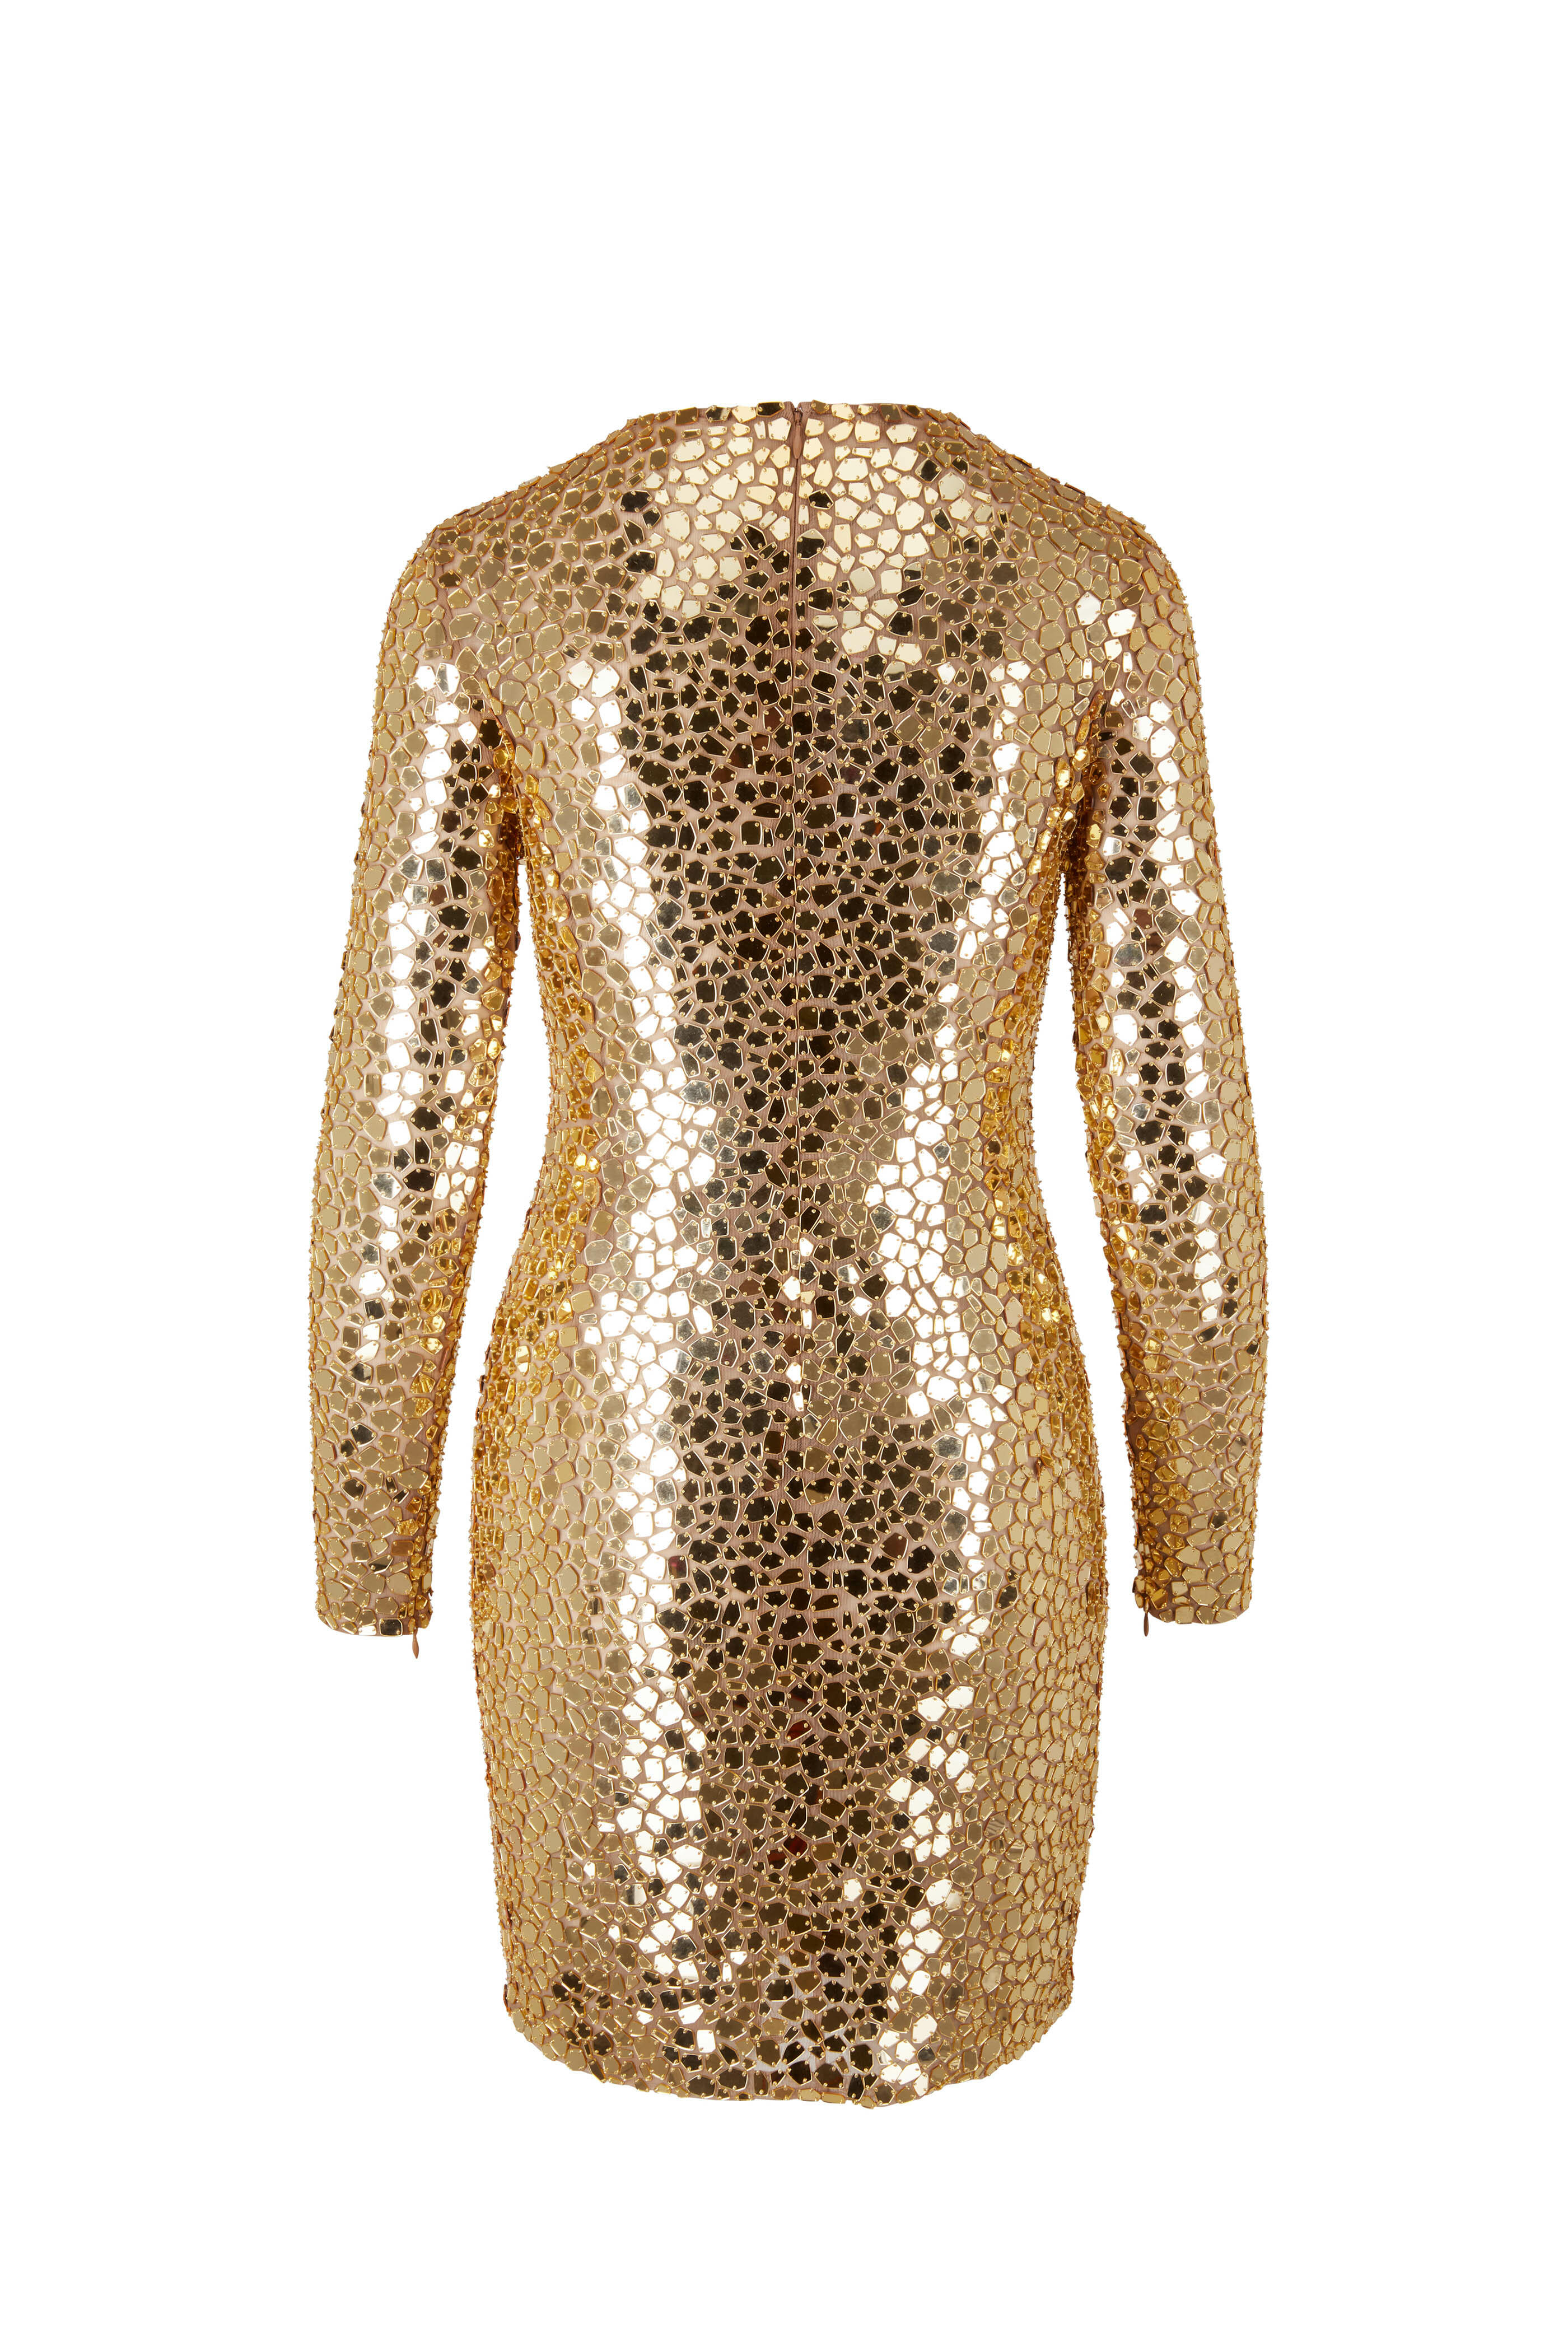 Michael Kors Collection - Gold Mirror Embellished Long-Sleeve Mini Dress